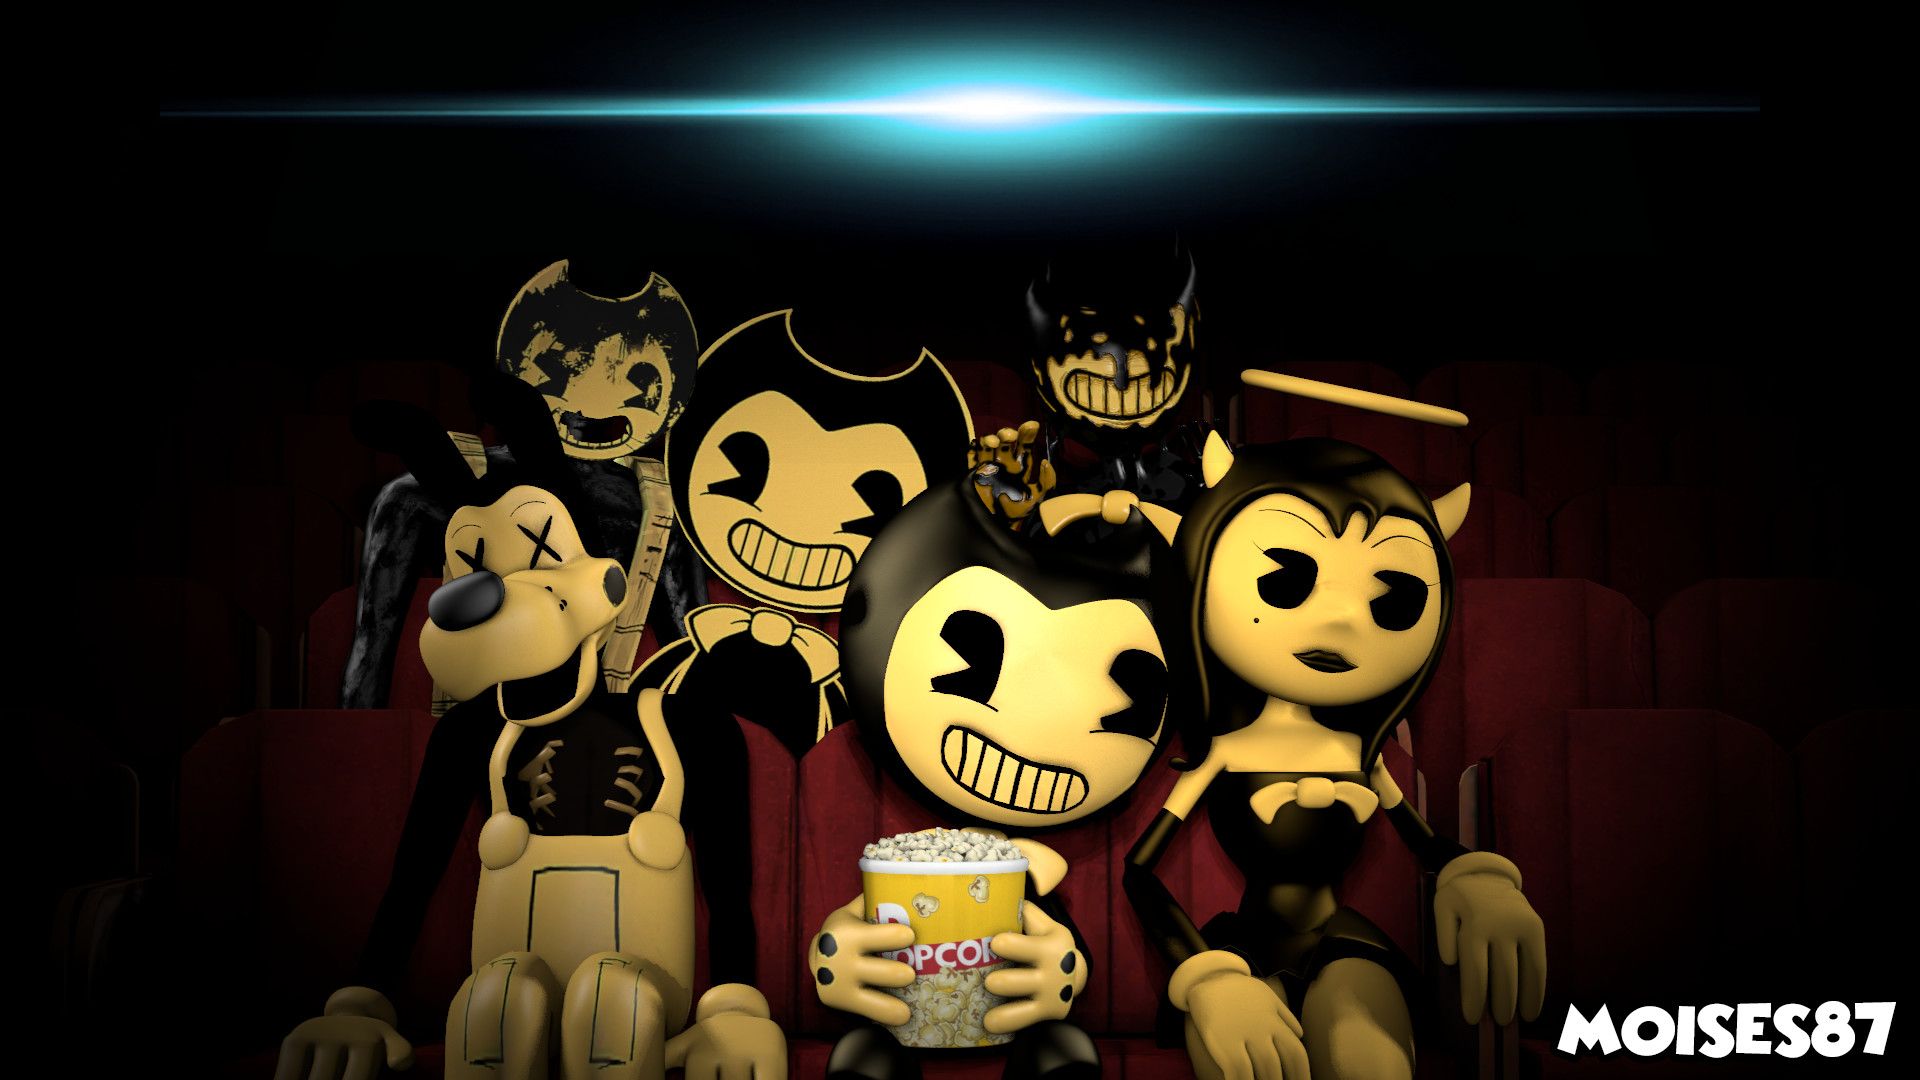 Free download Bendy and The Ink Machine Wallpaper [1920x1080]